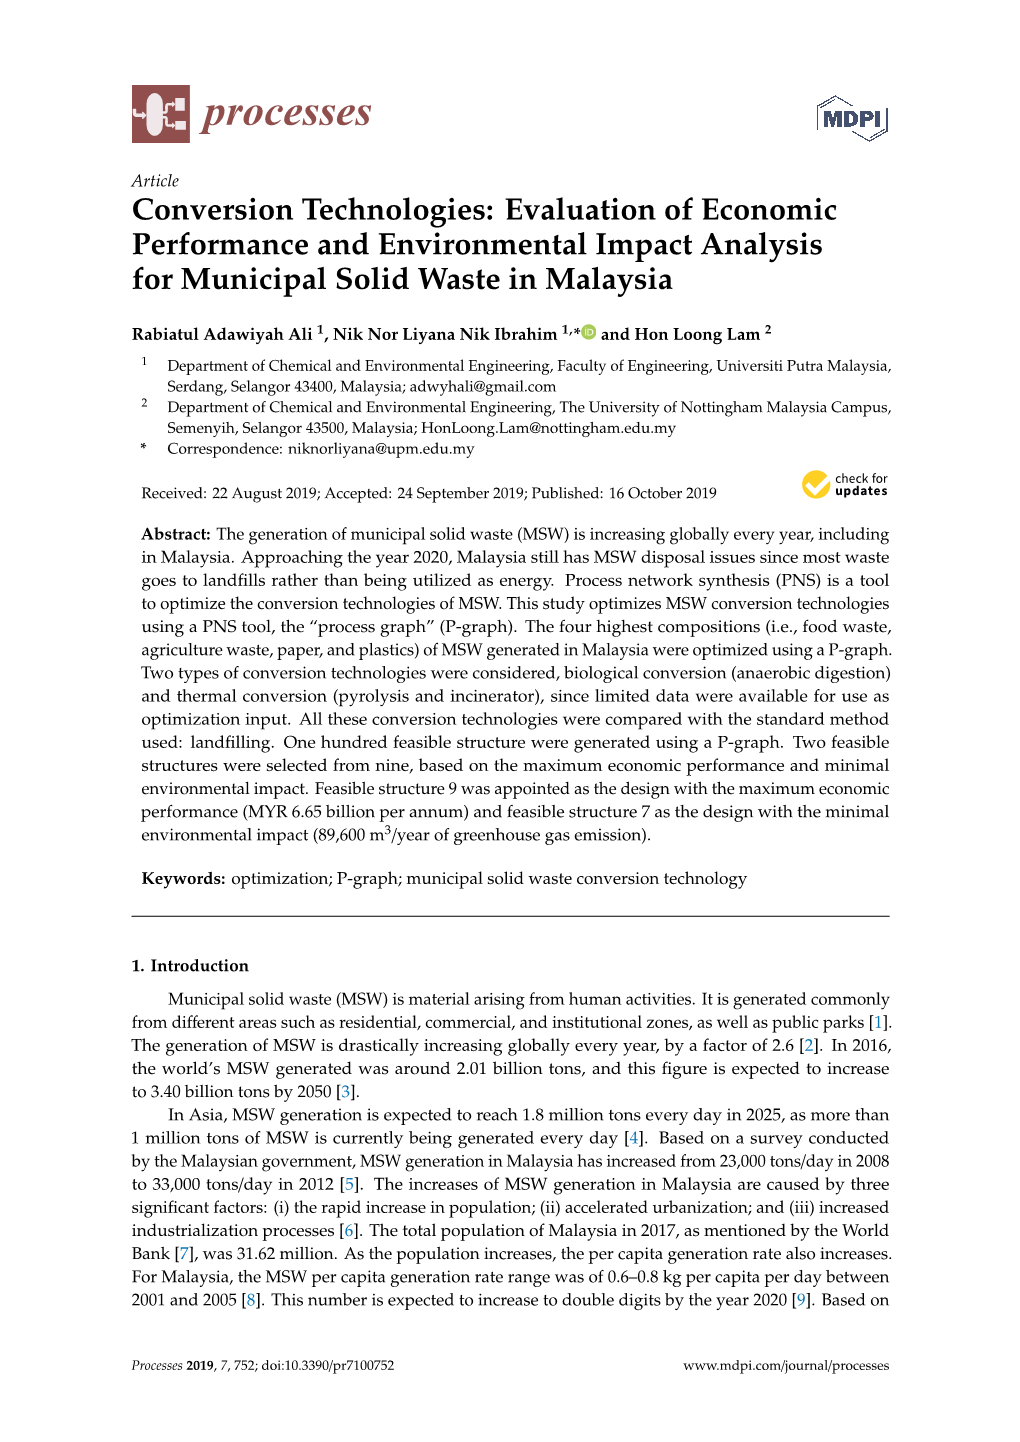 Conversion Technologies: Evaluation of Economic Performance and Environmental Impact Analysis for Municipal Solid Waste in Malaysia